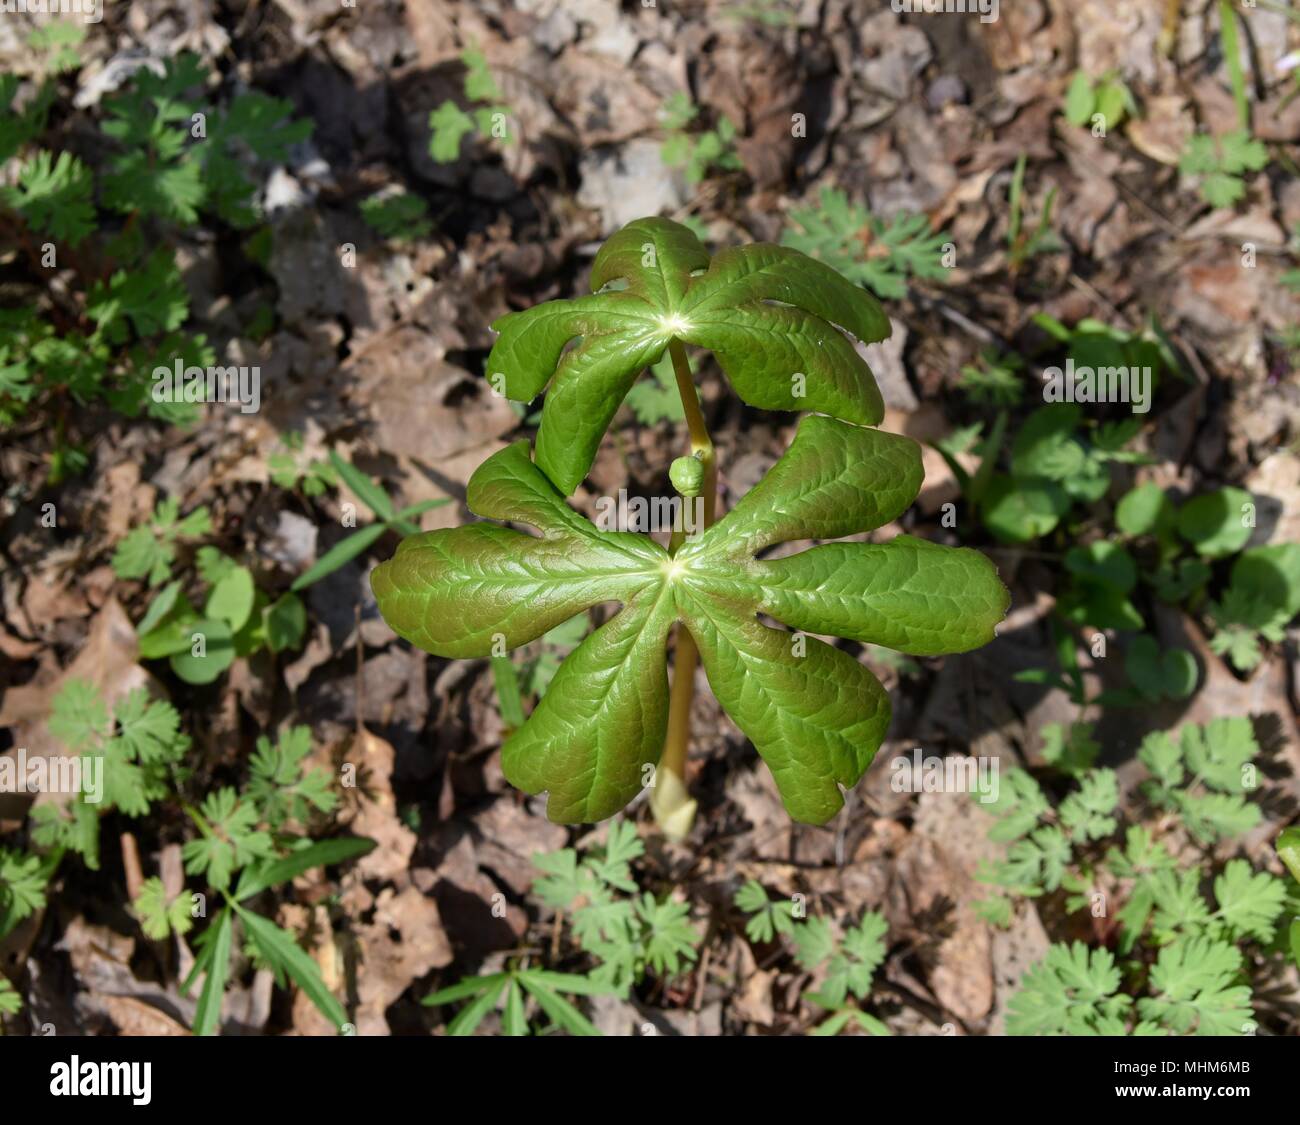 Twin green leaves of a mayapple plant with a flower bud in between. Stock Photo